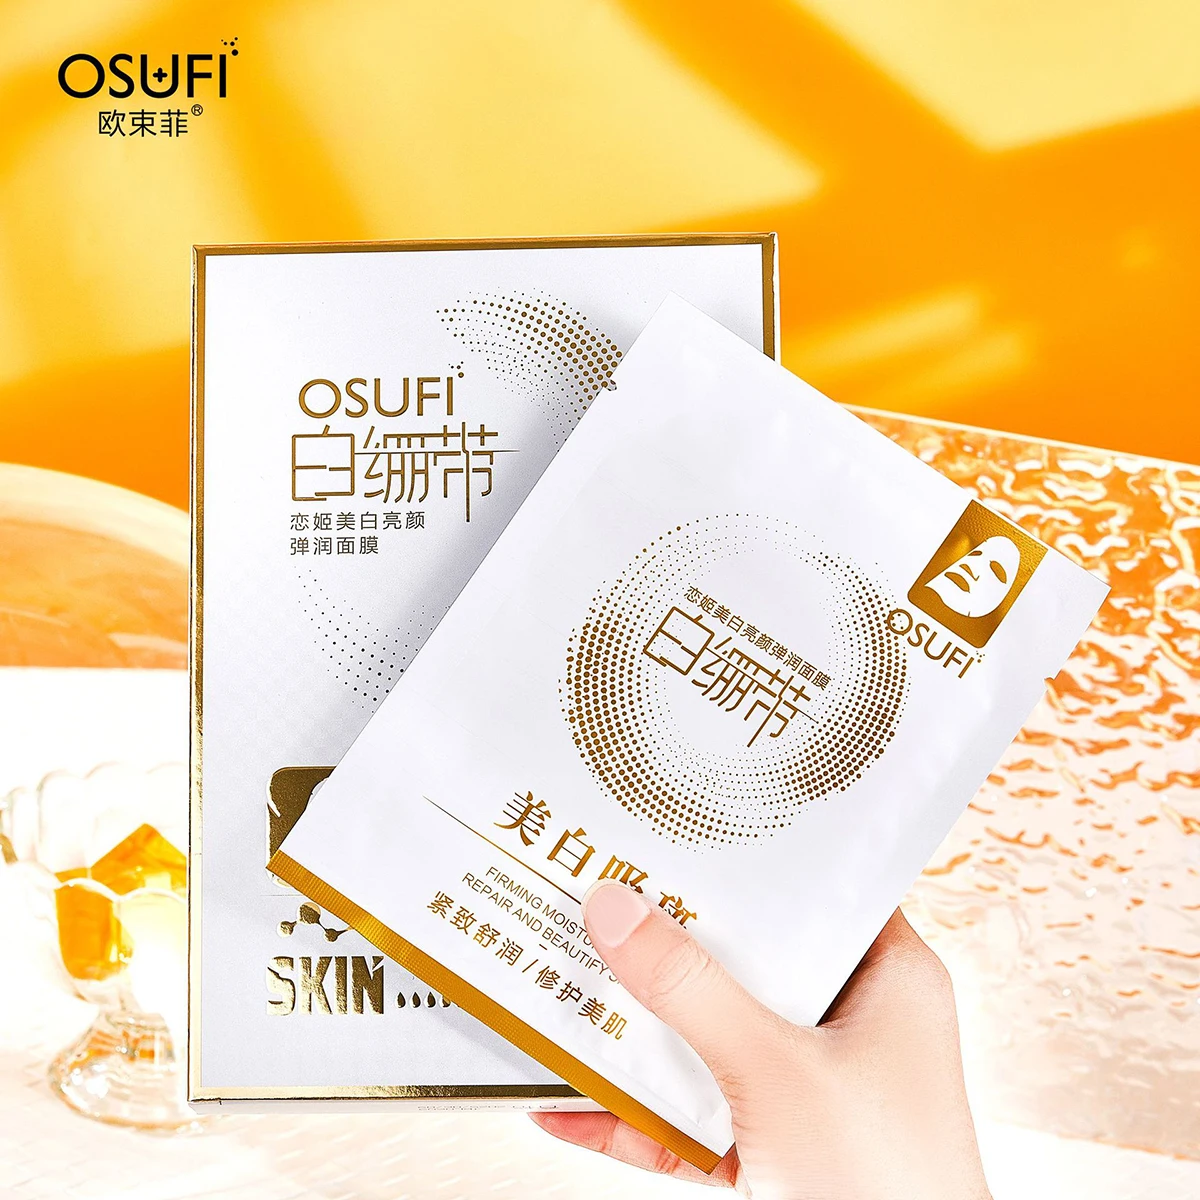 OSUFI Whitening Facial Mask Firming Soothing Repair Beauty Skin Remove Dark Spot Facial Care Face Mask Korea Skincare Products